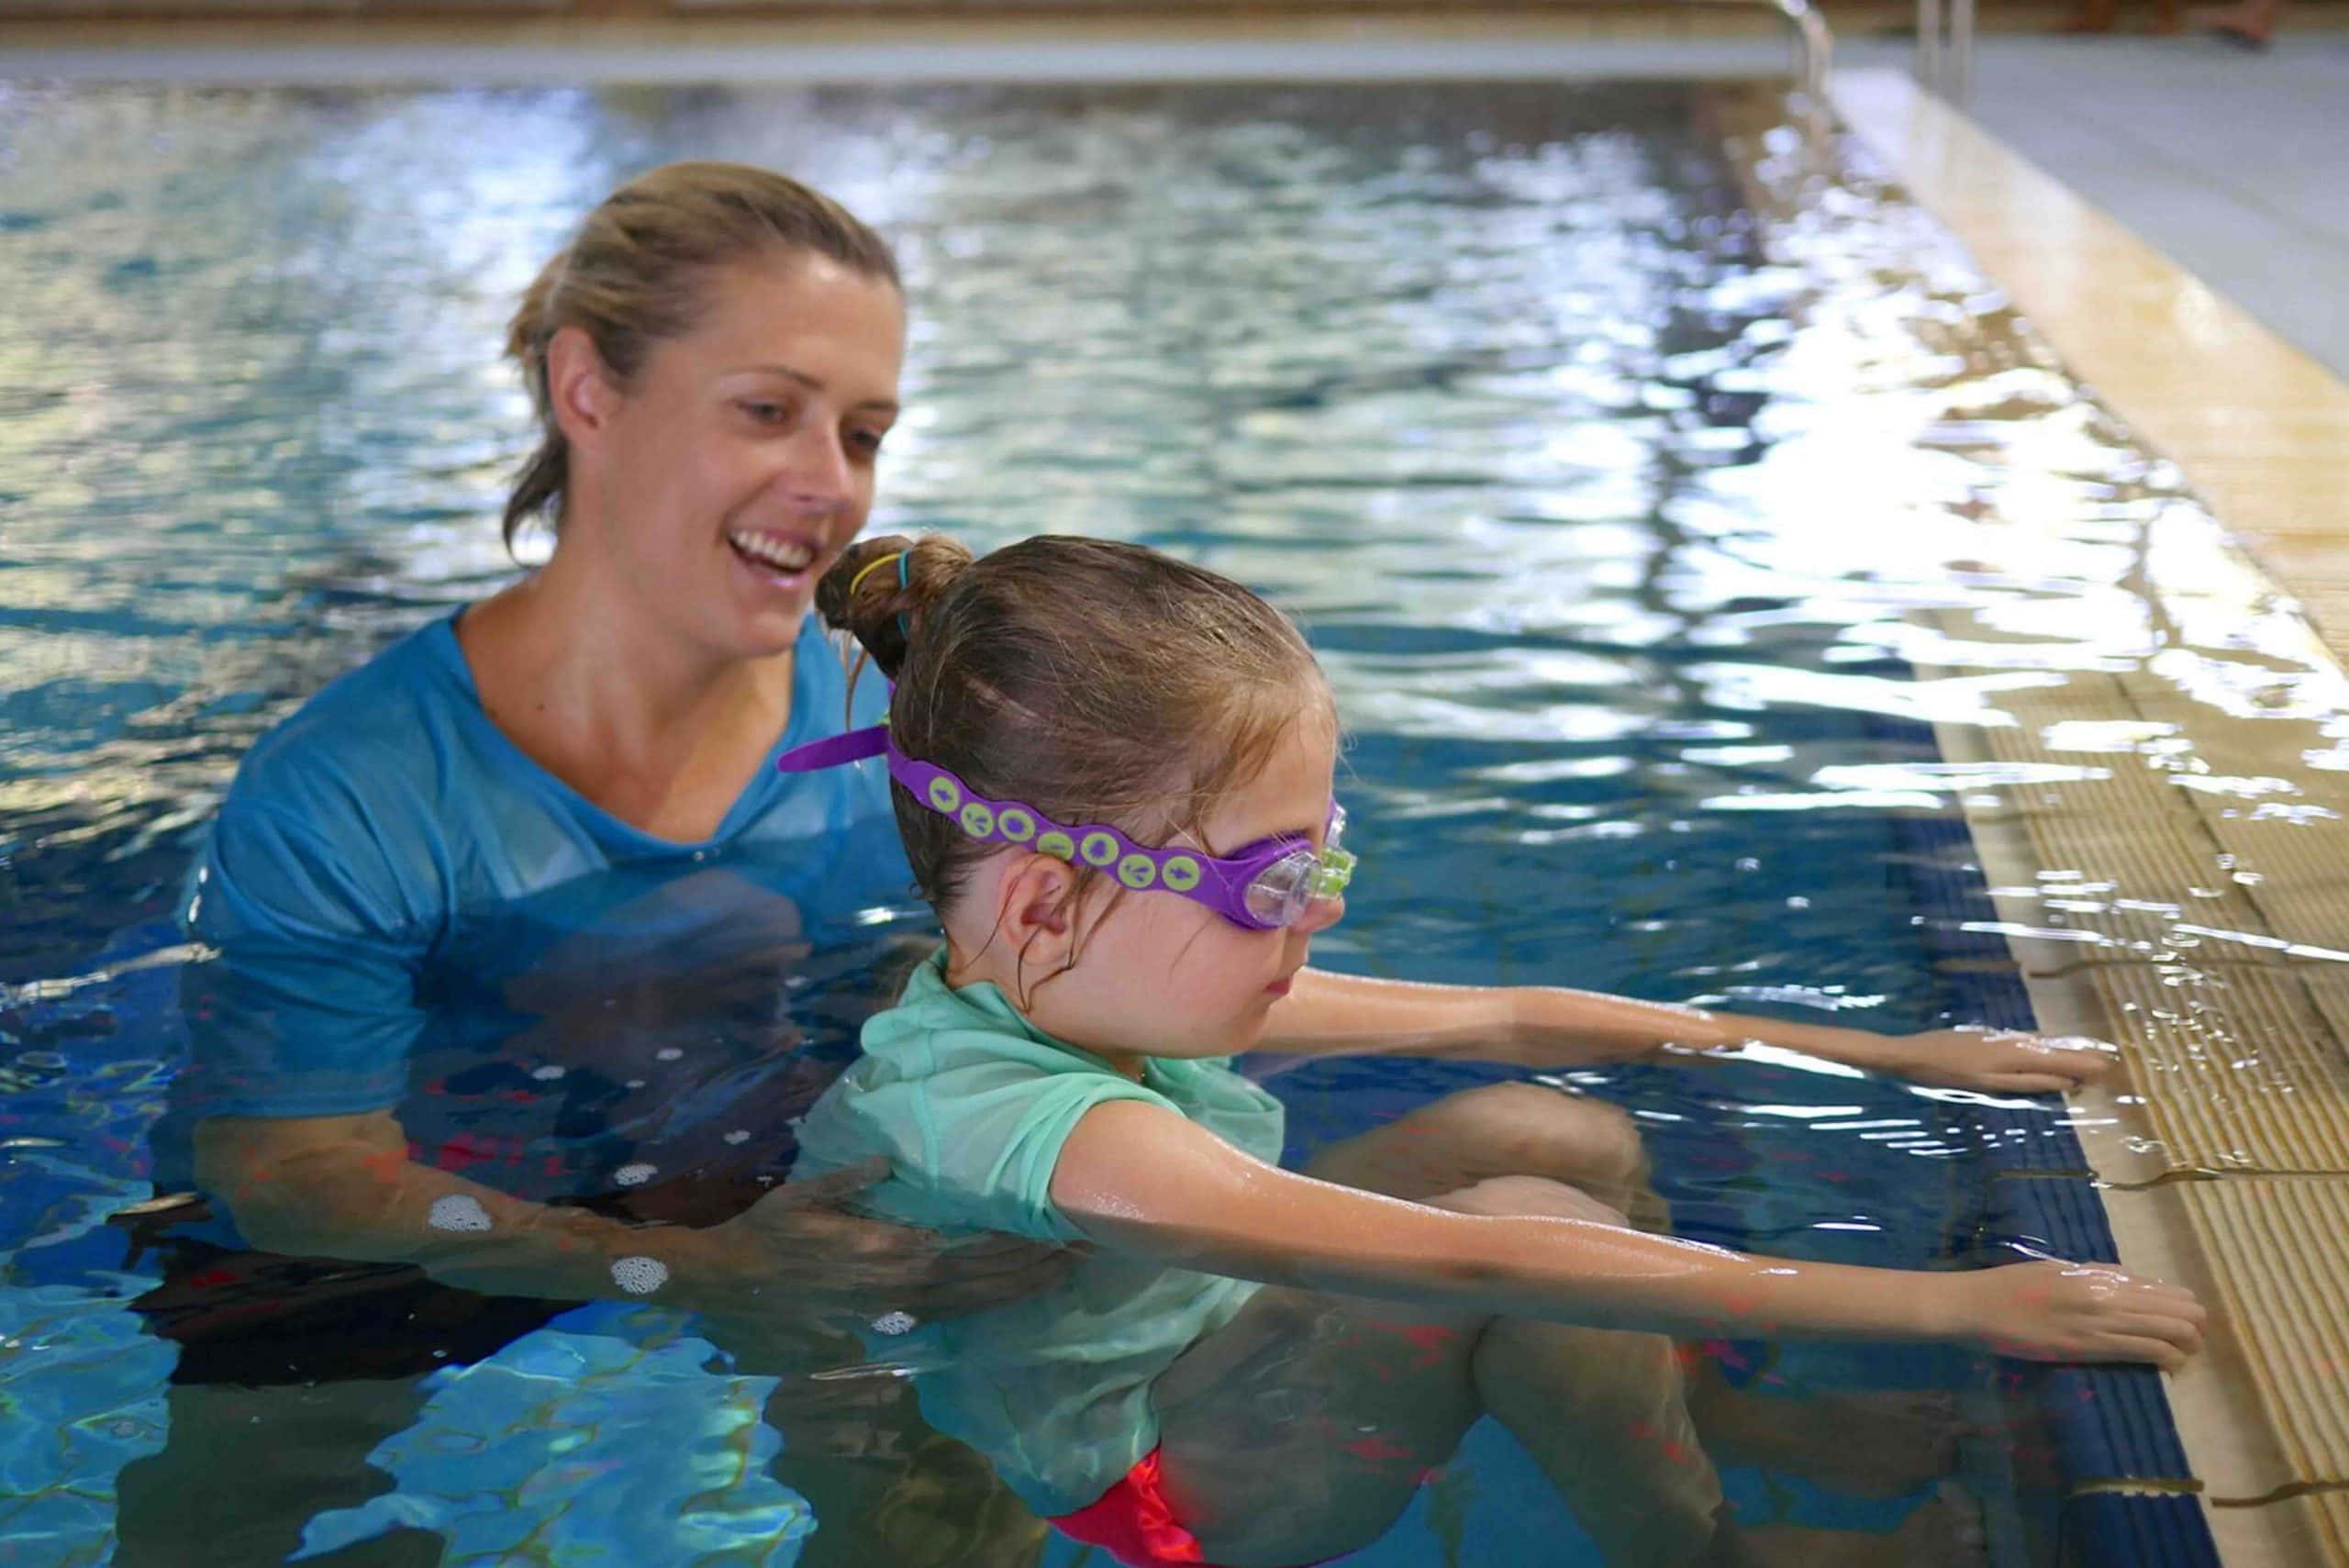 A female swimming instructor is teaching a young girl in a swimming pool.